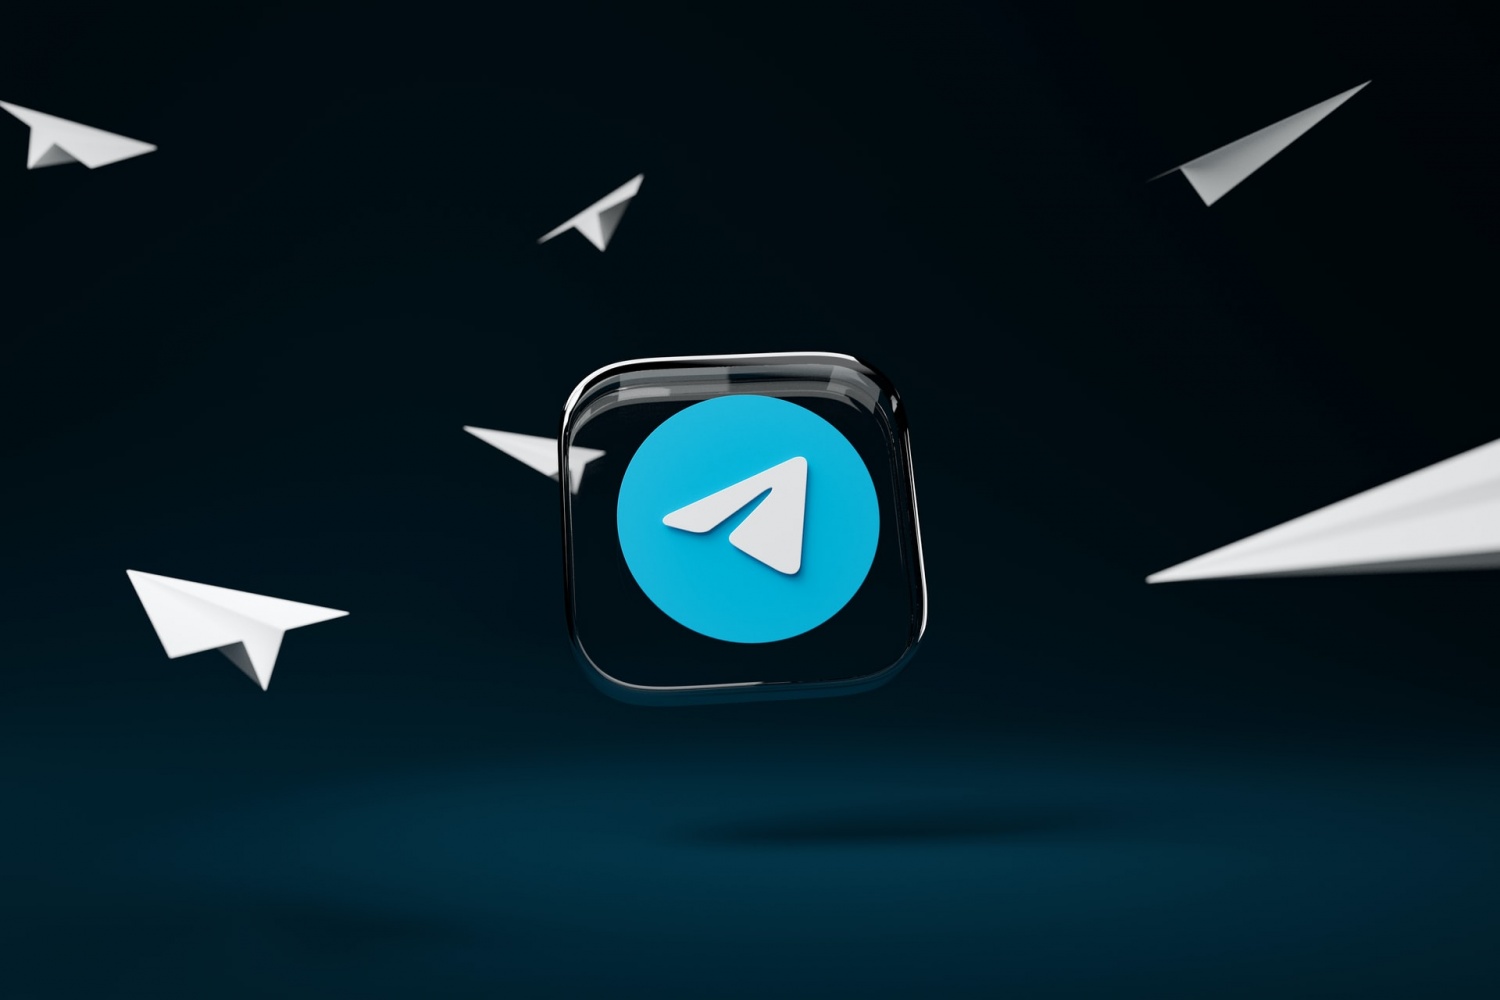 Telegram Premium Subscription Might Introduce Exclusive Stickers, Reactions in the App